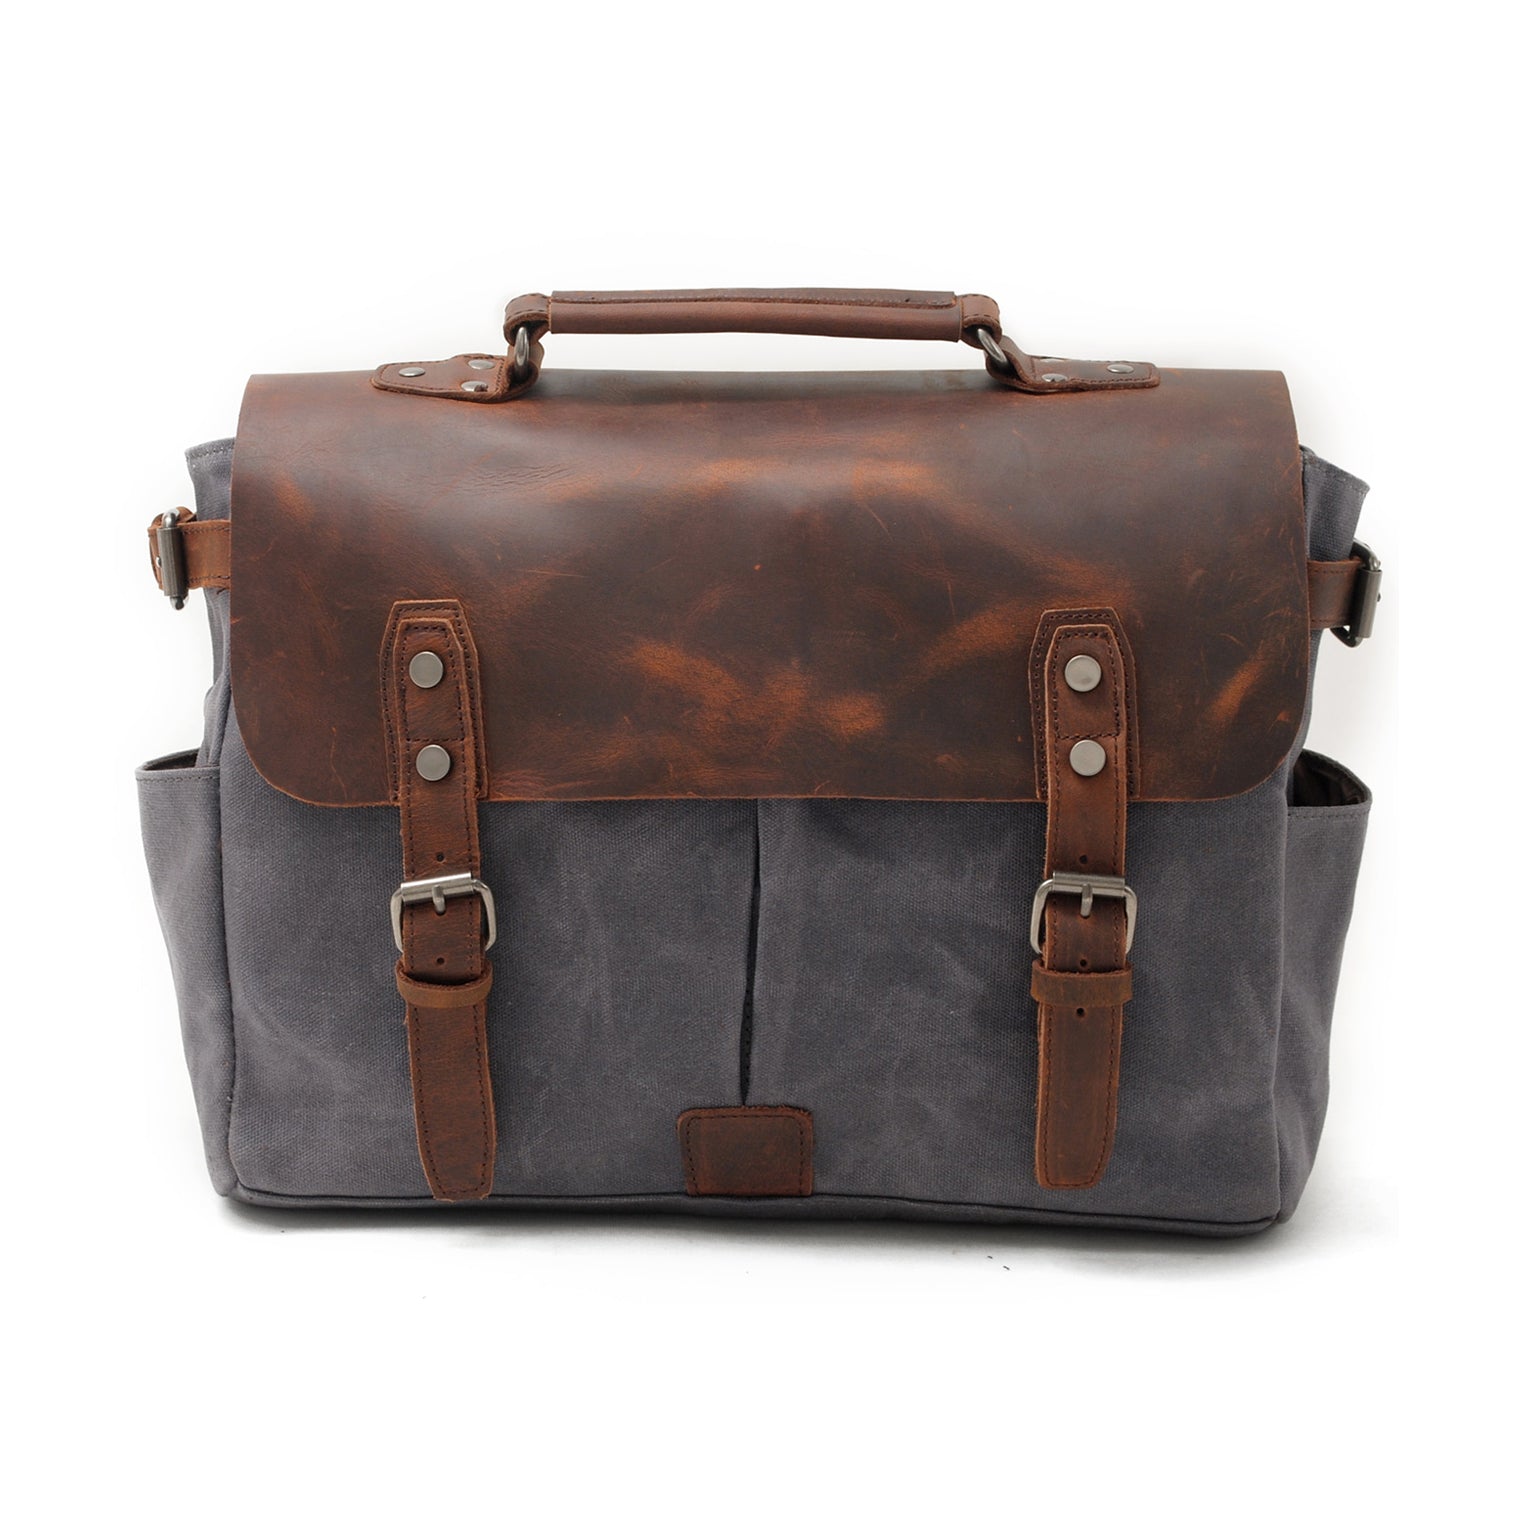 Vintage-Waxed-Canvas-and-Crazy-Horse-Leather-Laptop-Messenger-Bag-Gray-i7bags-1